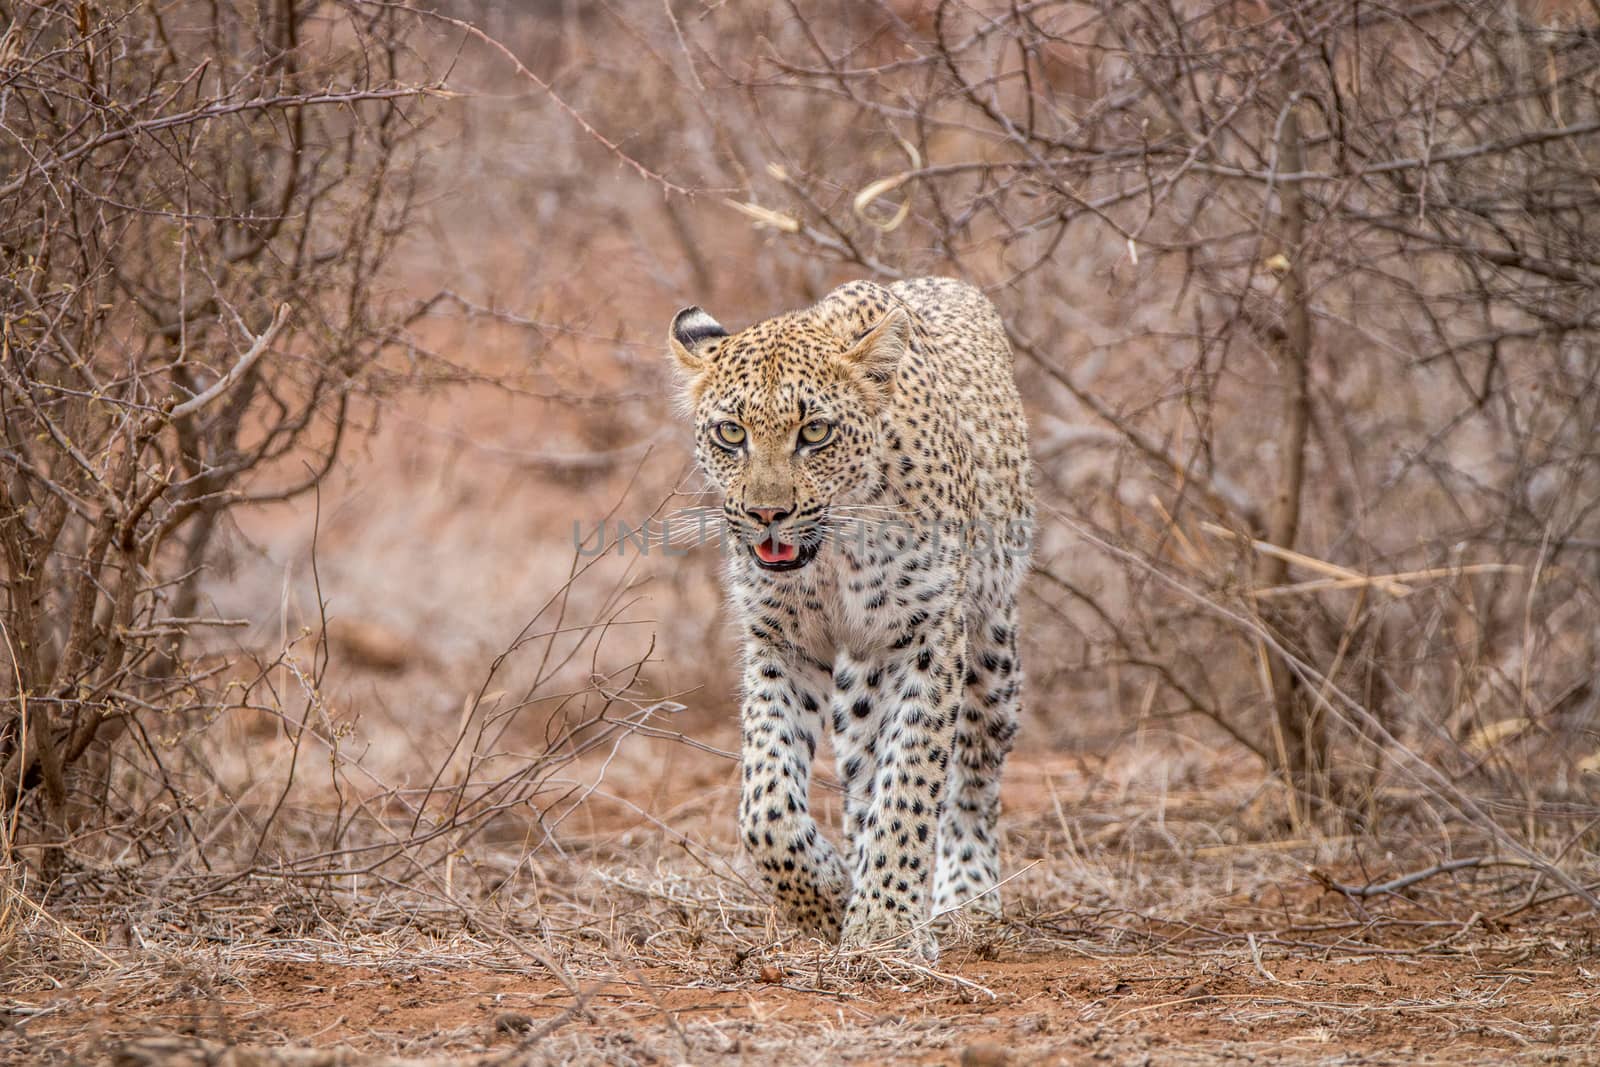 Leopard walking towards the camera in the Kruger National Park by Simoneemanphotography